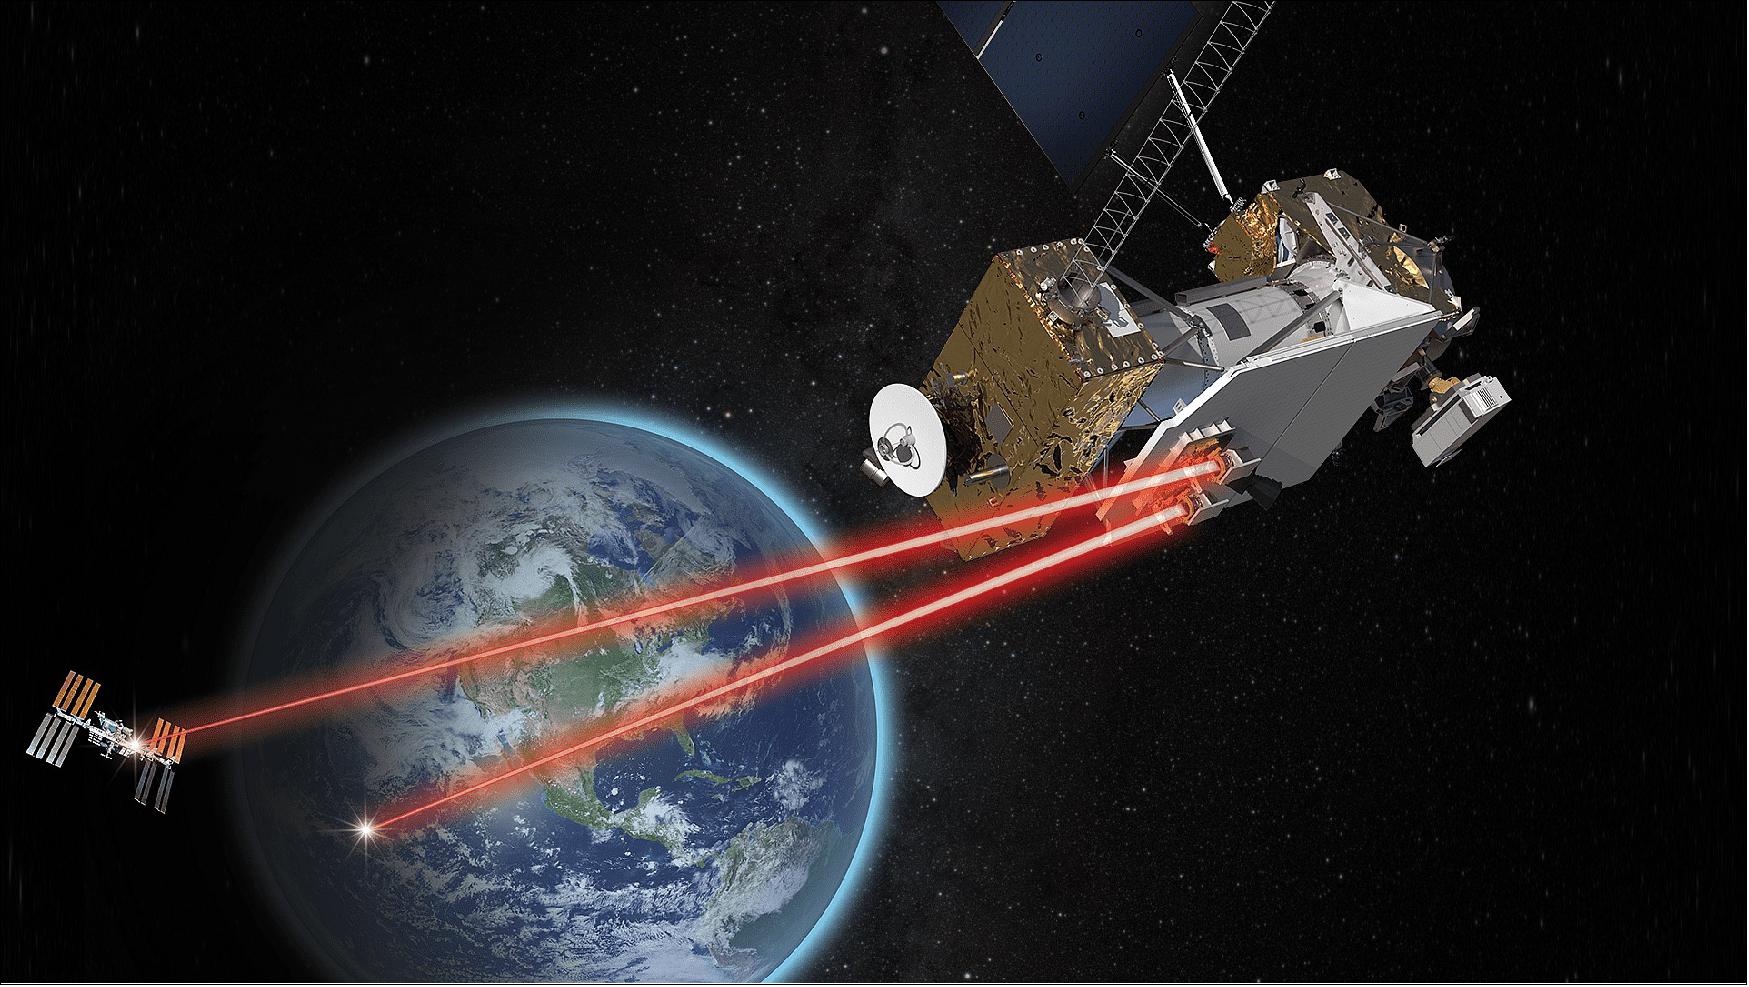 Figure 4: A conceptualization of NASA's Laser Communications Relay Demonstration (LCRD) communicating data over infrared laser links between the International Space Station and a ground station on Earth (image credit: NASA/Dave Ryan)